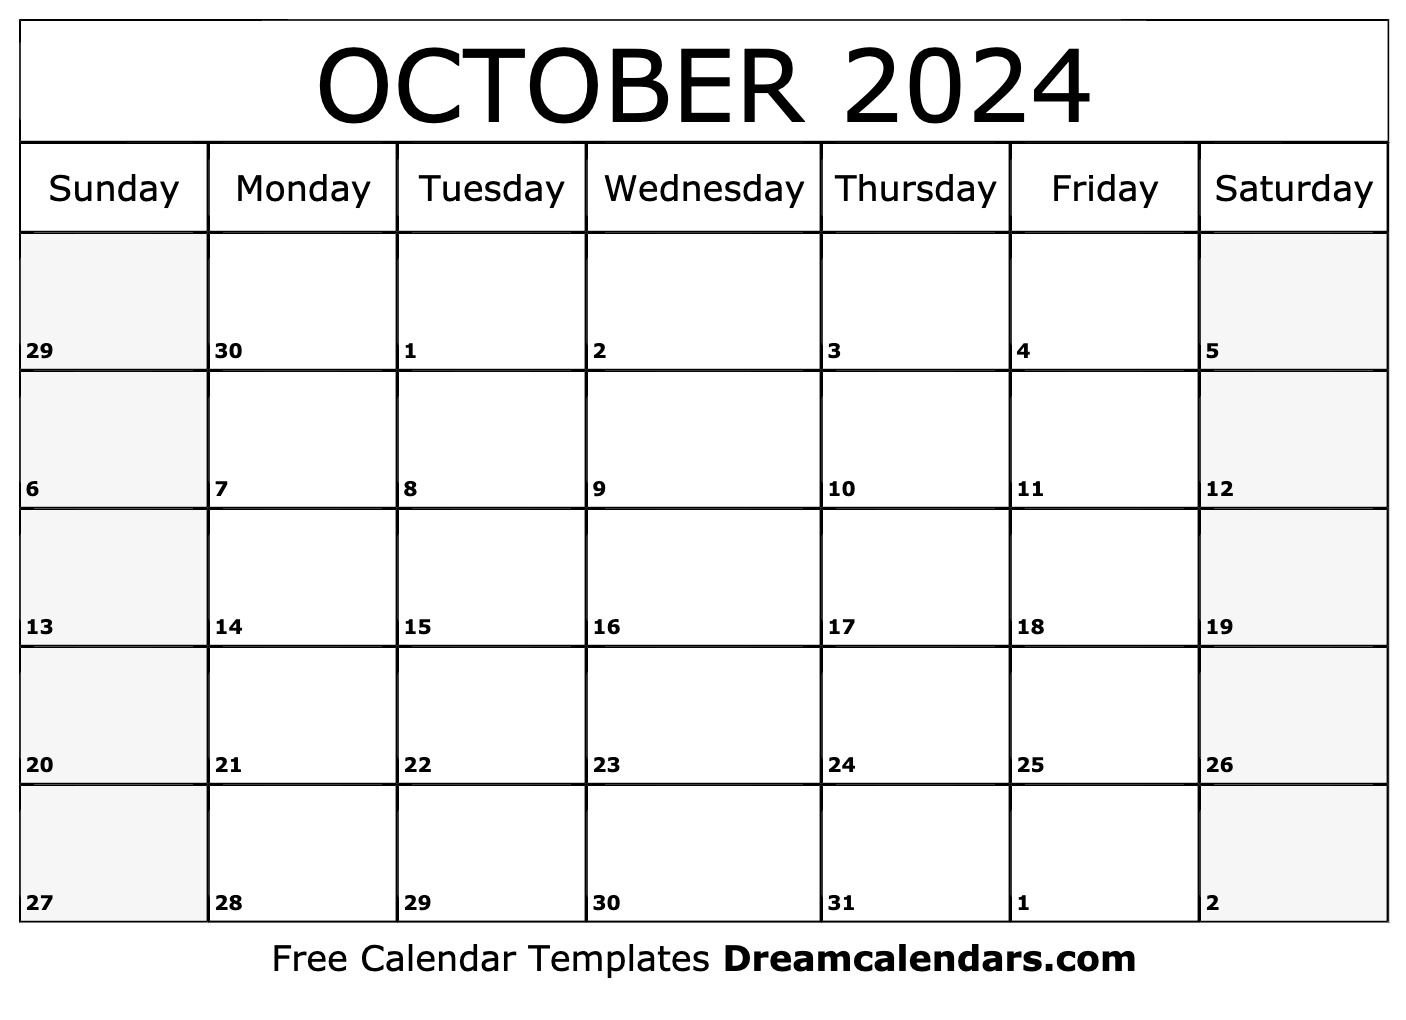 October 2024 Calendar | Free Blank Printable With Holidays for Printable October 2024 Calendar